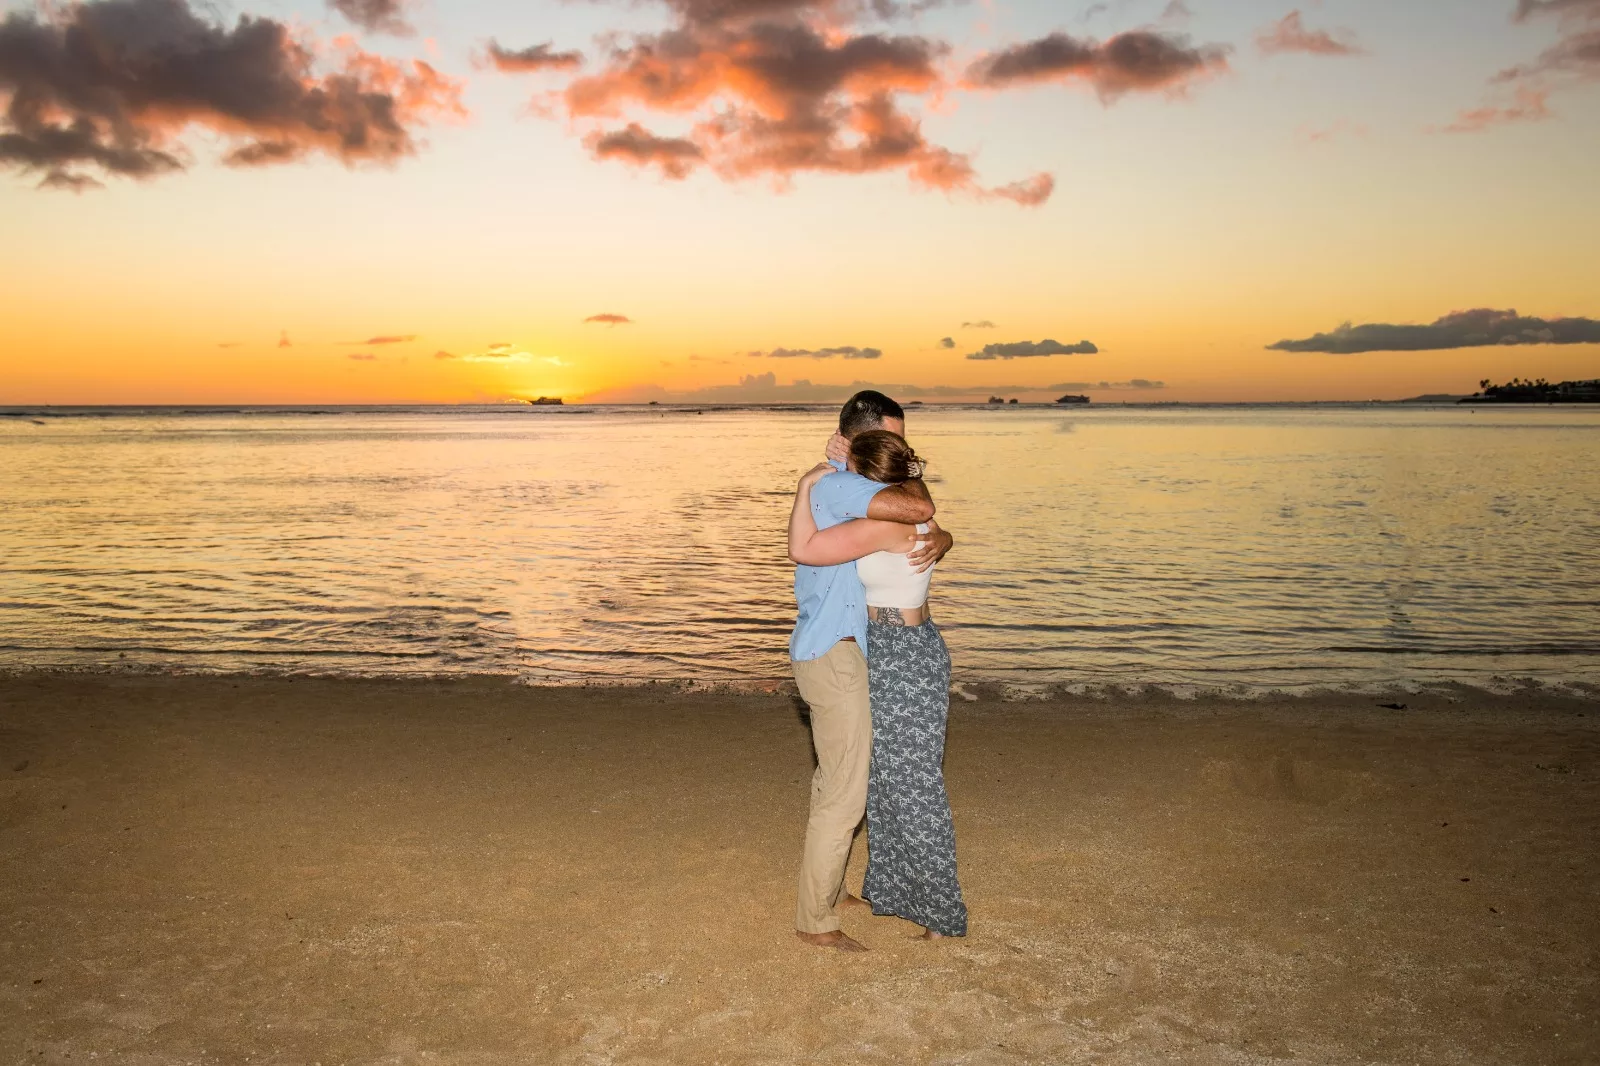 an image of a couple in the beach hugging captured by koolina photographer